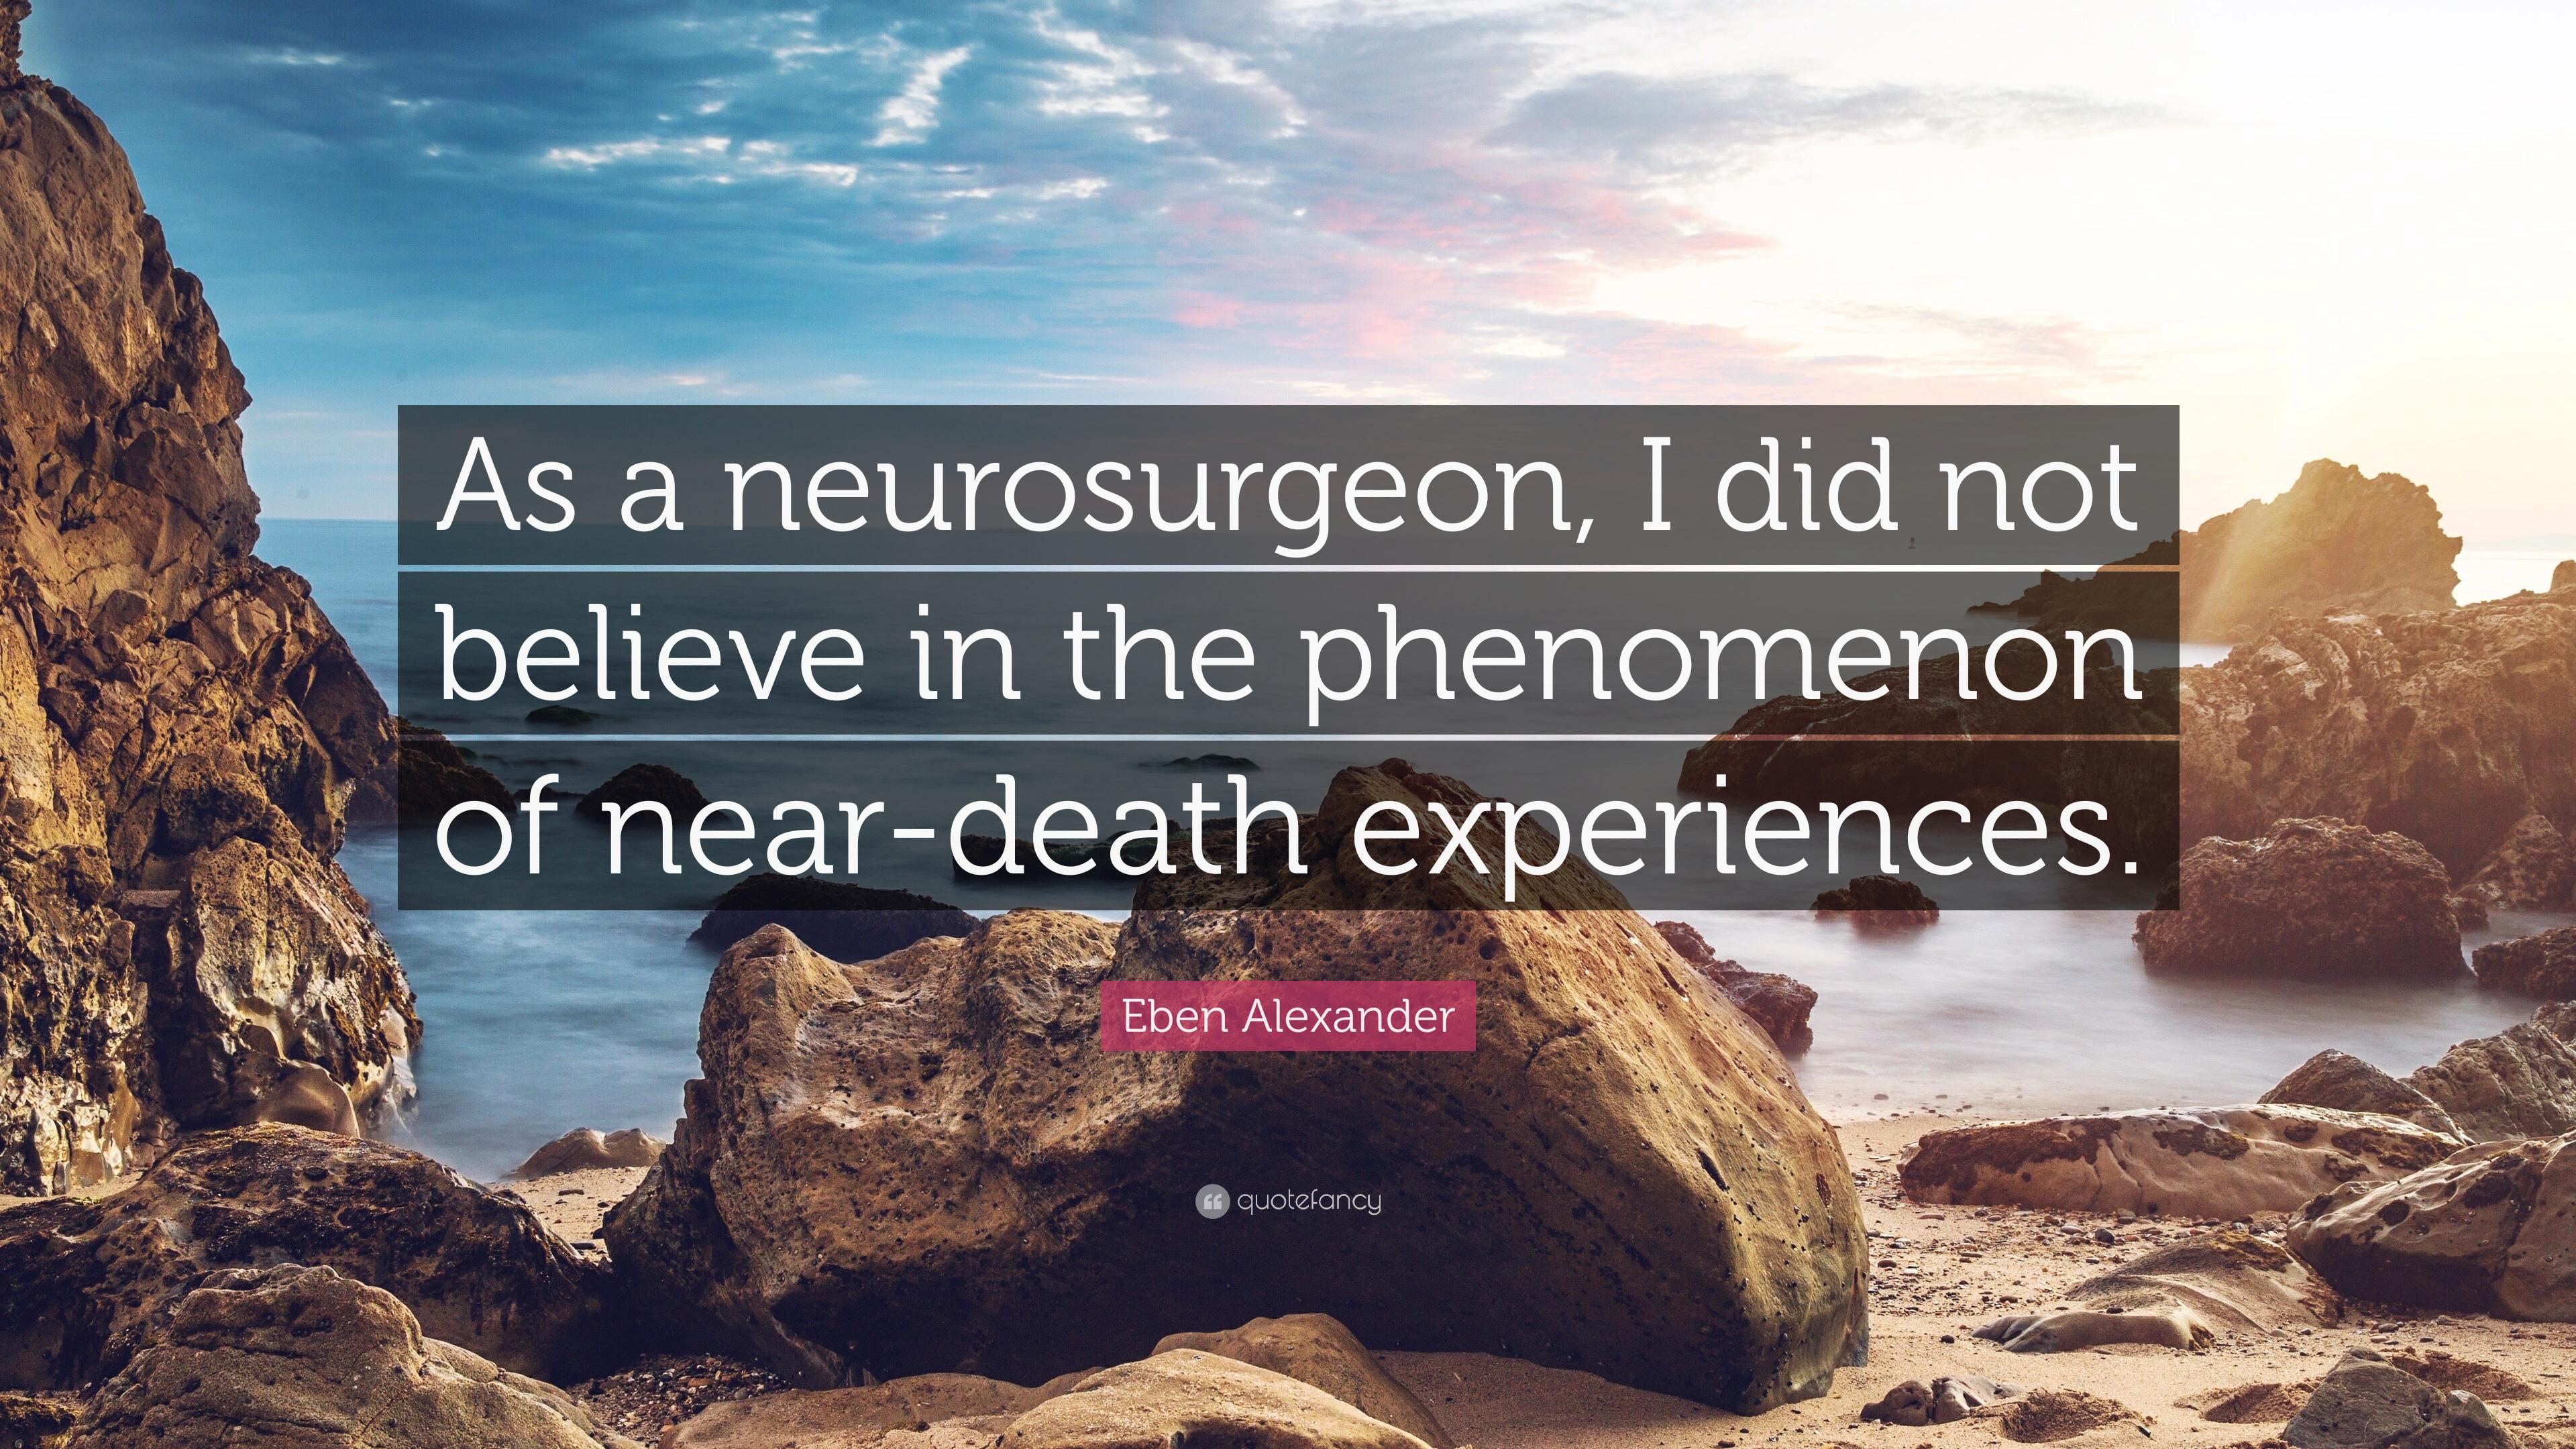 Eben Alexander Quote: “As a neurosurgeon, I did not believe in